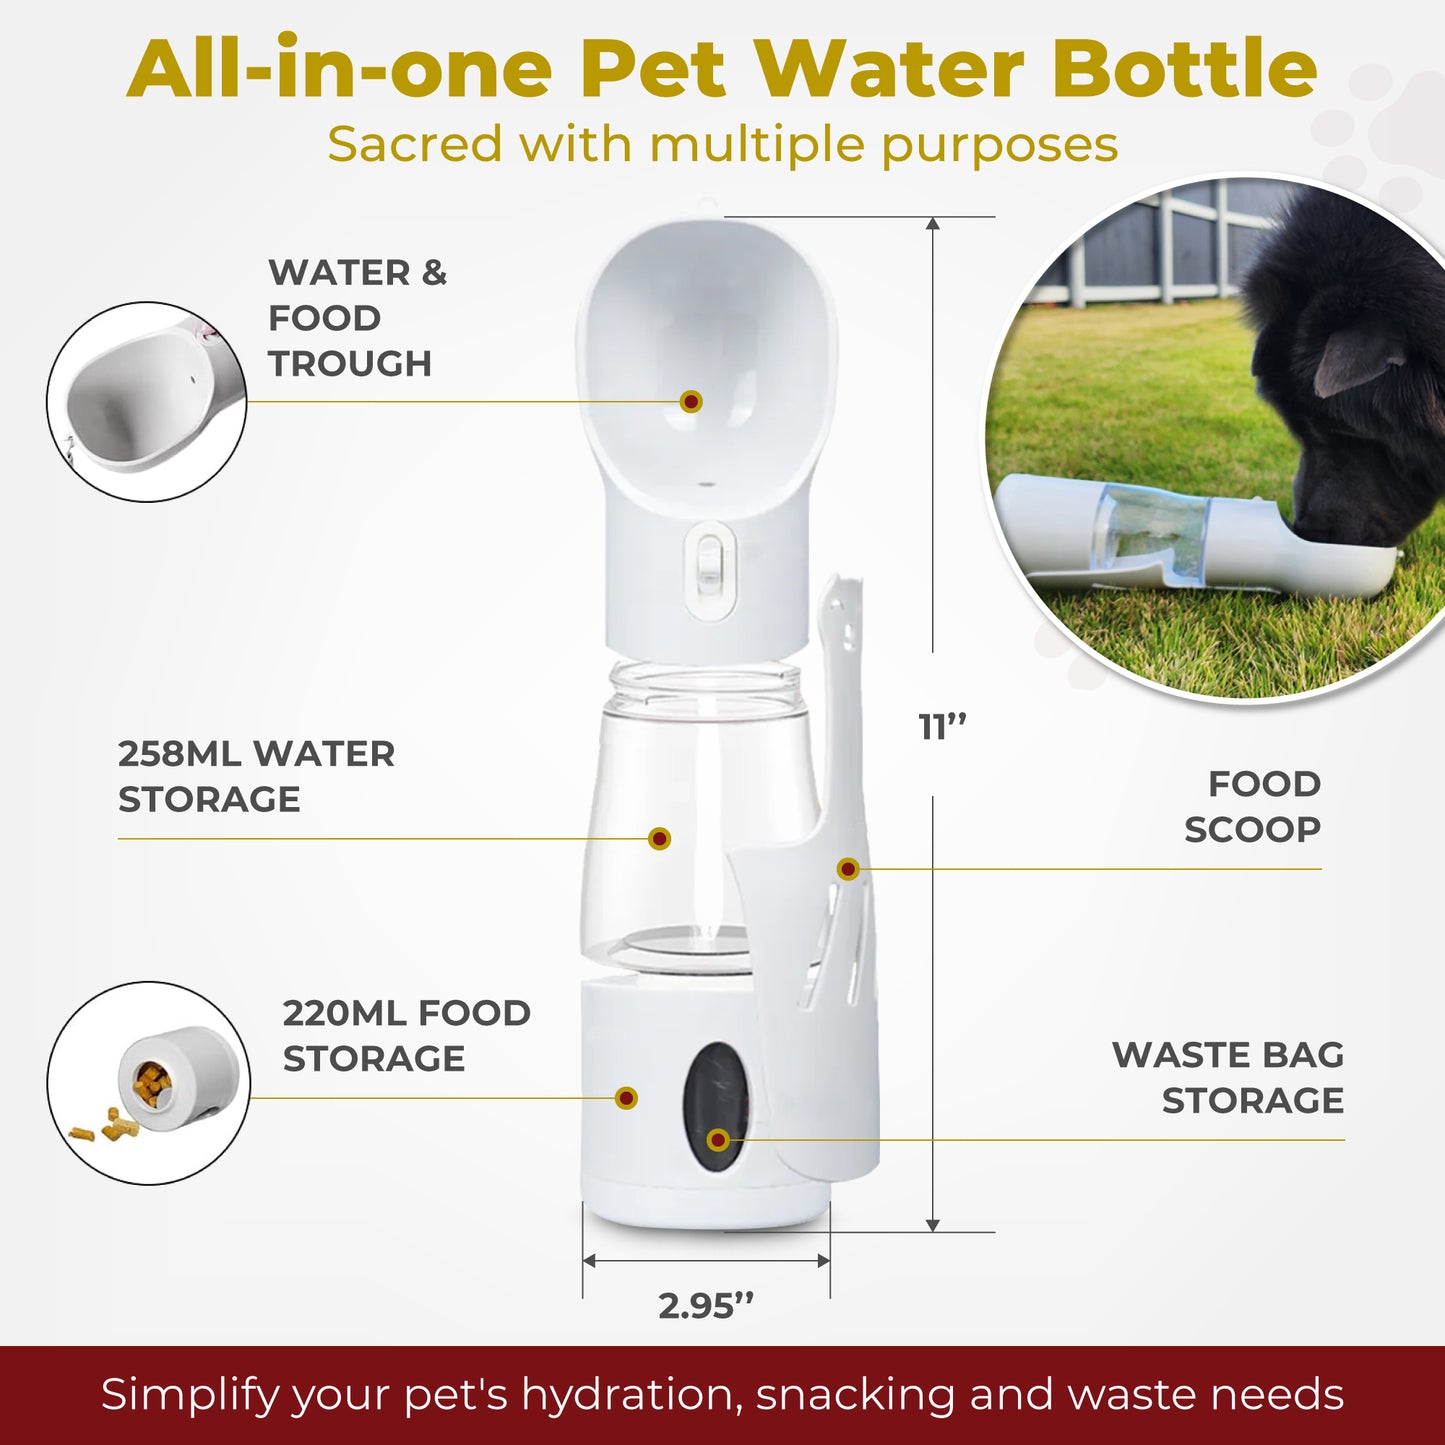 pet water bottle travel water bottle for dogs bottle dog water bottle for walking  travel essentials dog treats pet toys portable walking running water bottle dispenser bowl 4 in 1 bowl fda approved no leak proof interactive dog pooper scooper poo bag holder water bottle for dogs on the go snack container toys interactive boredom chew anti anxiety trough fda approved Pet owner gifts Accessories bandanas mom gifts pet supplies large small extra where to buy bandanas for sale best chew toy for puppies